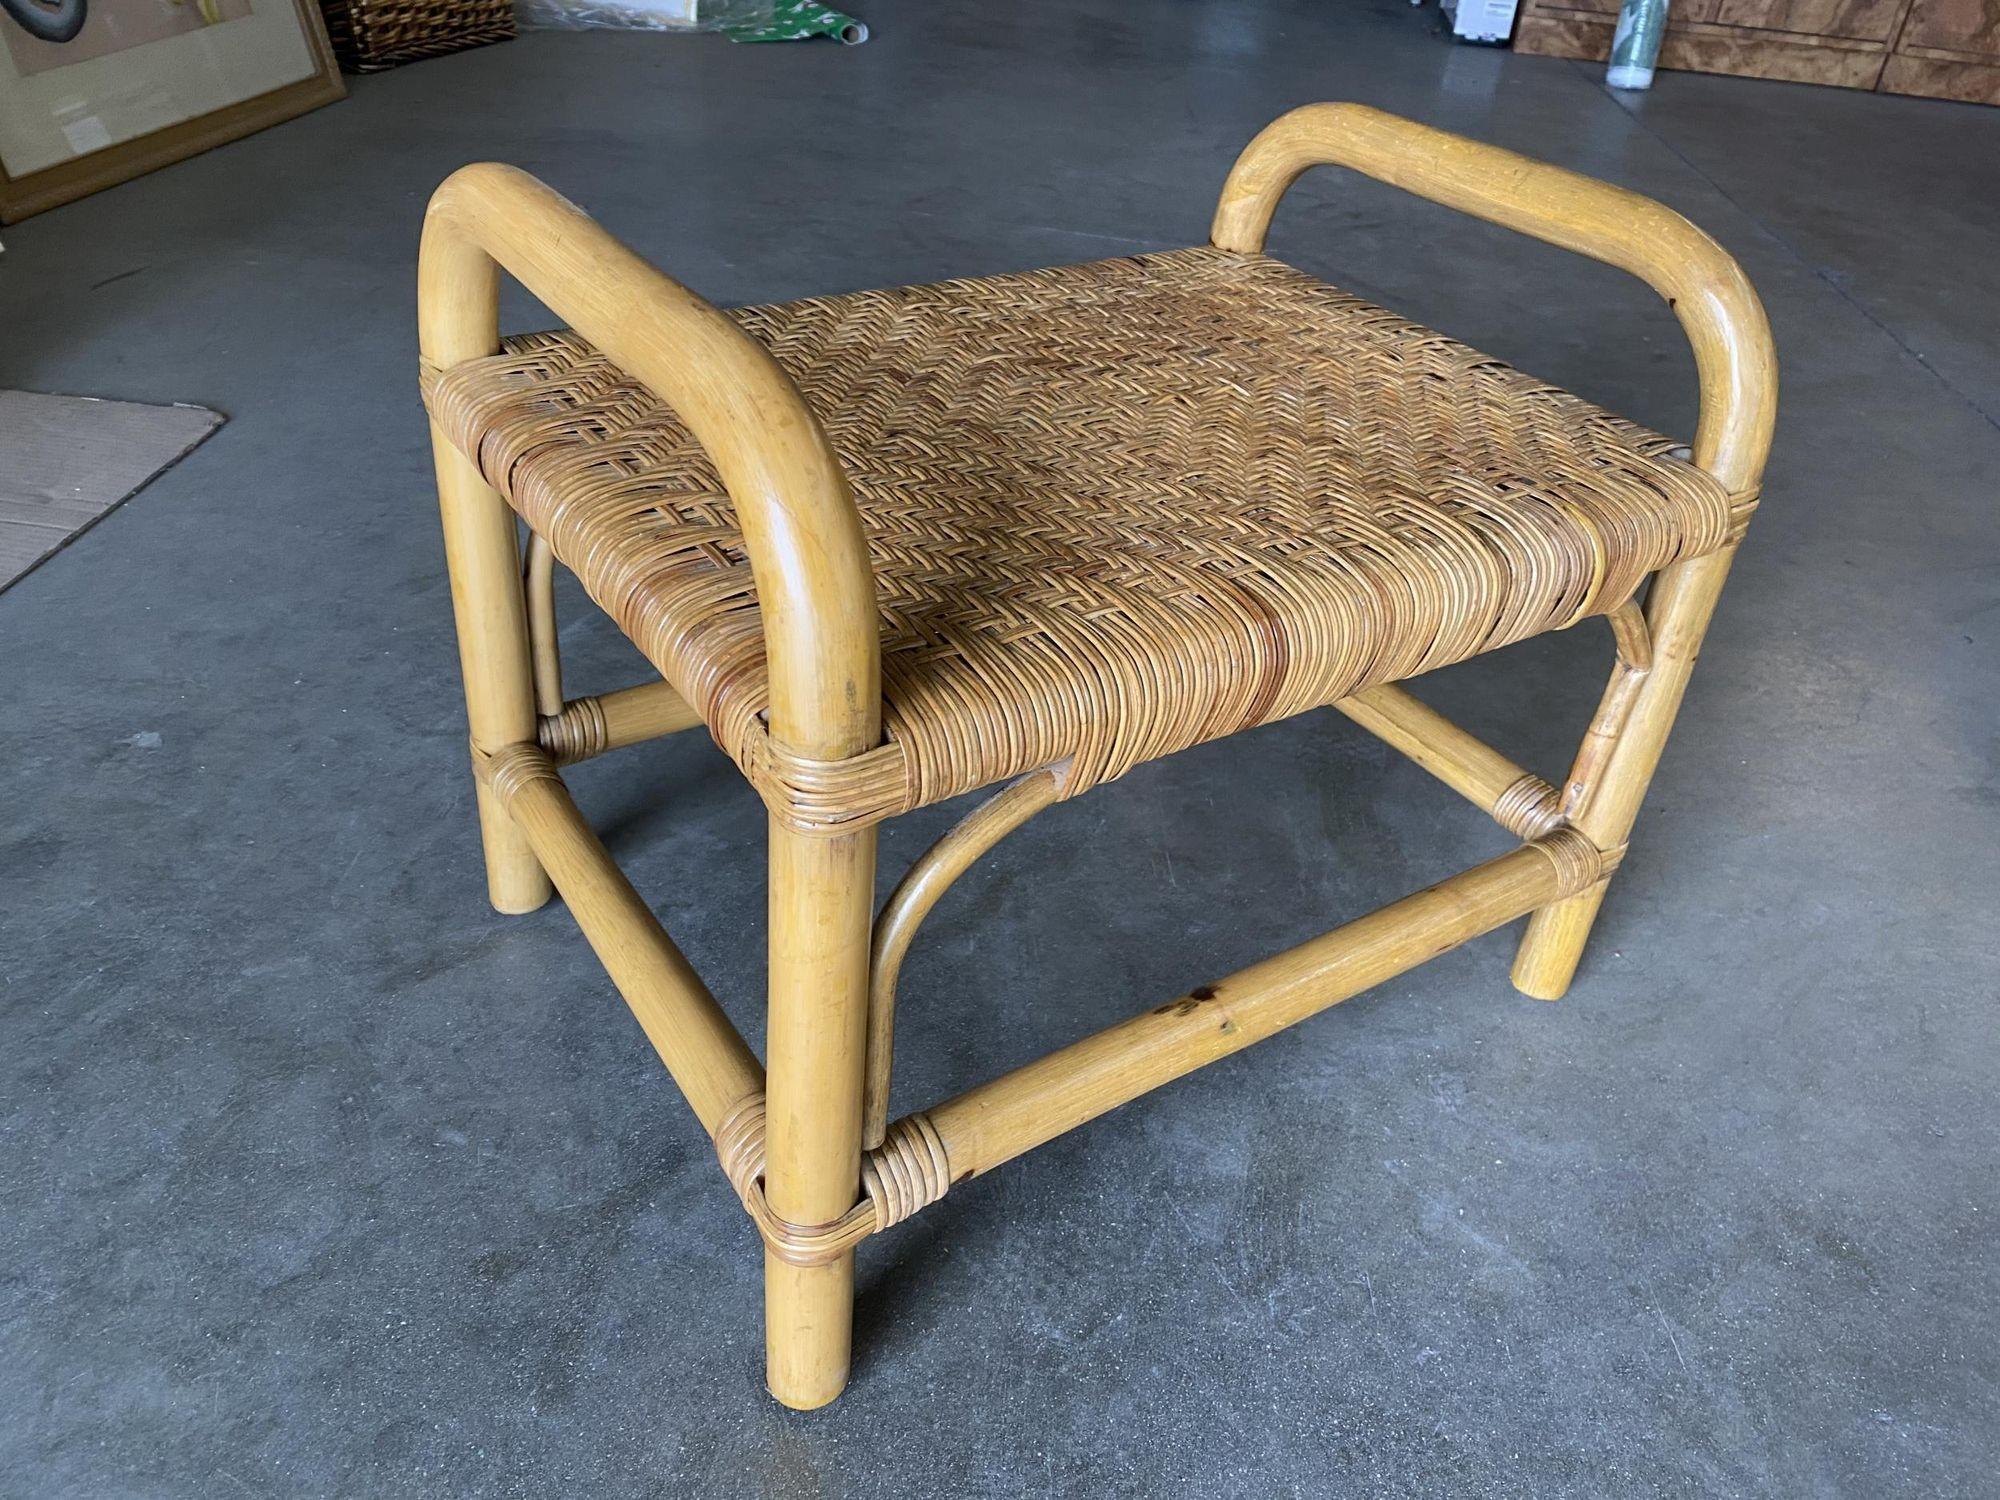 Restored Single Stand Rattan Staple Side Ottoman Stool W Woven Wicker Seat In Excellent Condition For Sale In Van Nuys, CA